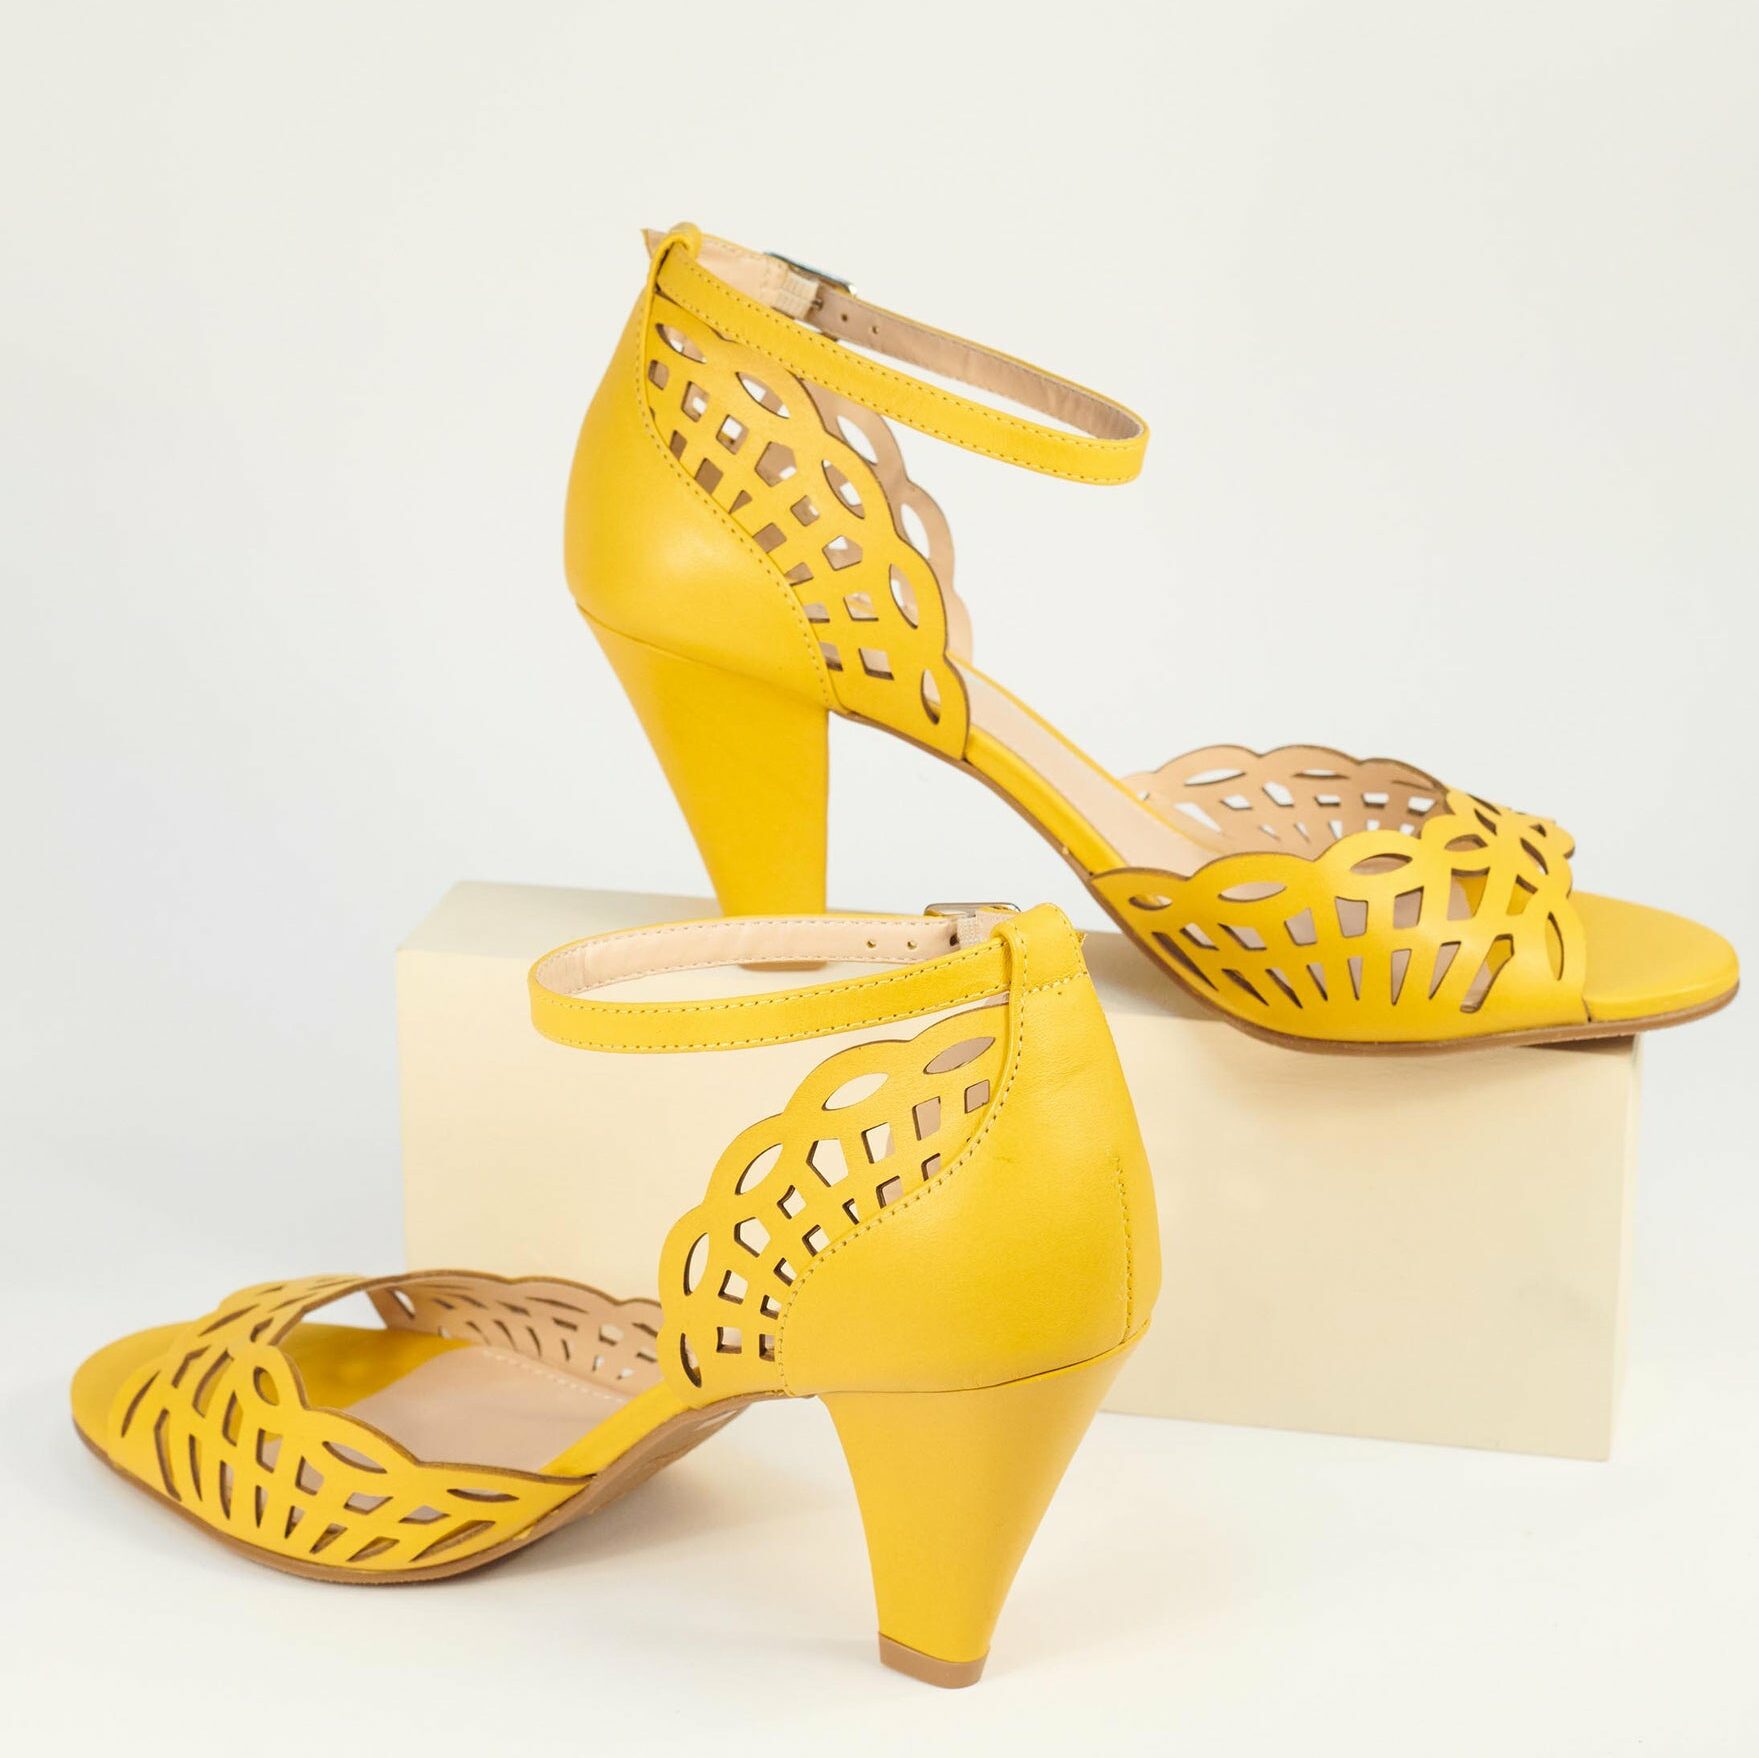 Novo Shoes - Always in good mood with pretty yellow heels!... | Facebook